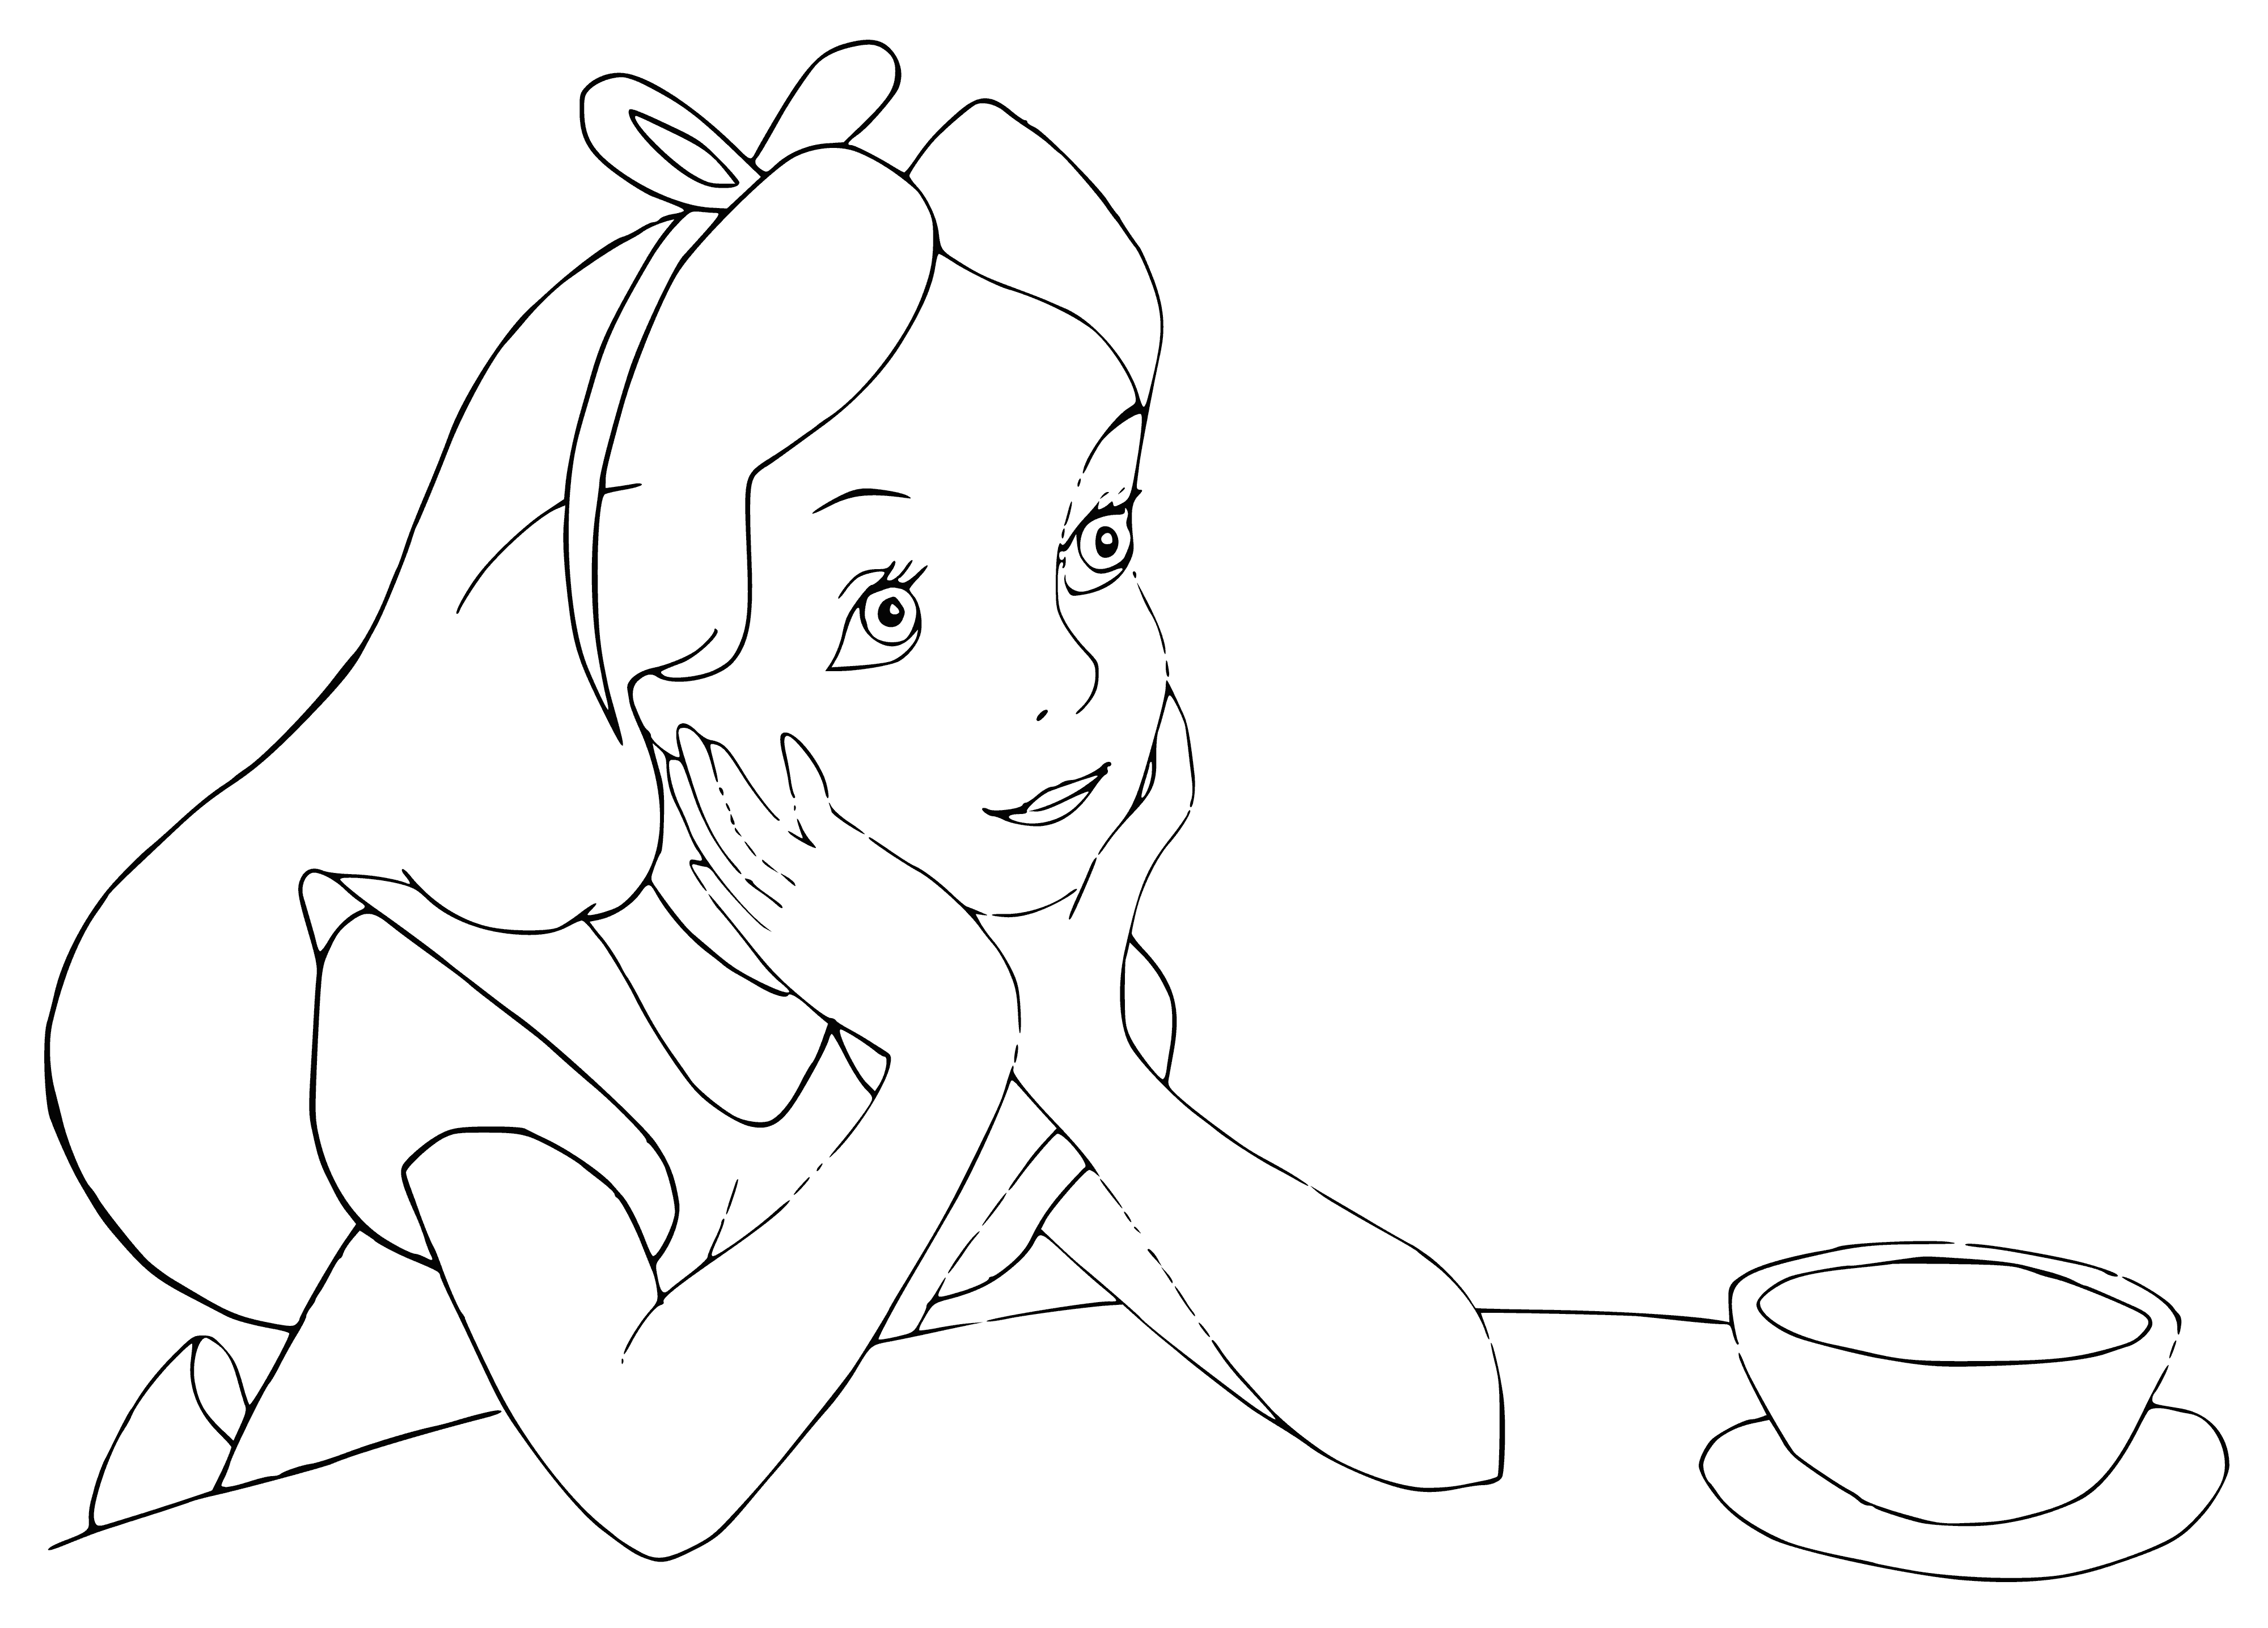 coloring page: Alice falls down a rabbit hole after finding a key and unlocking a door.